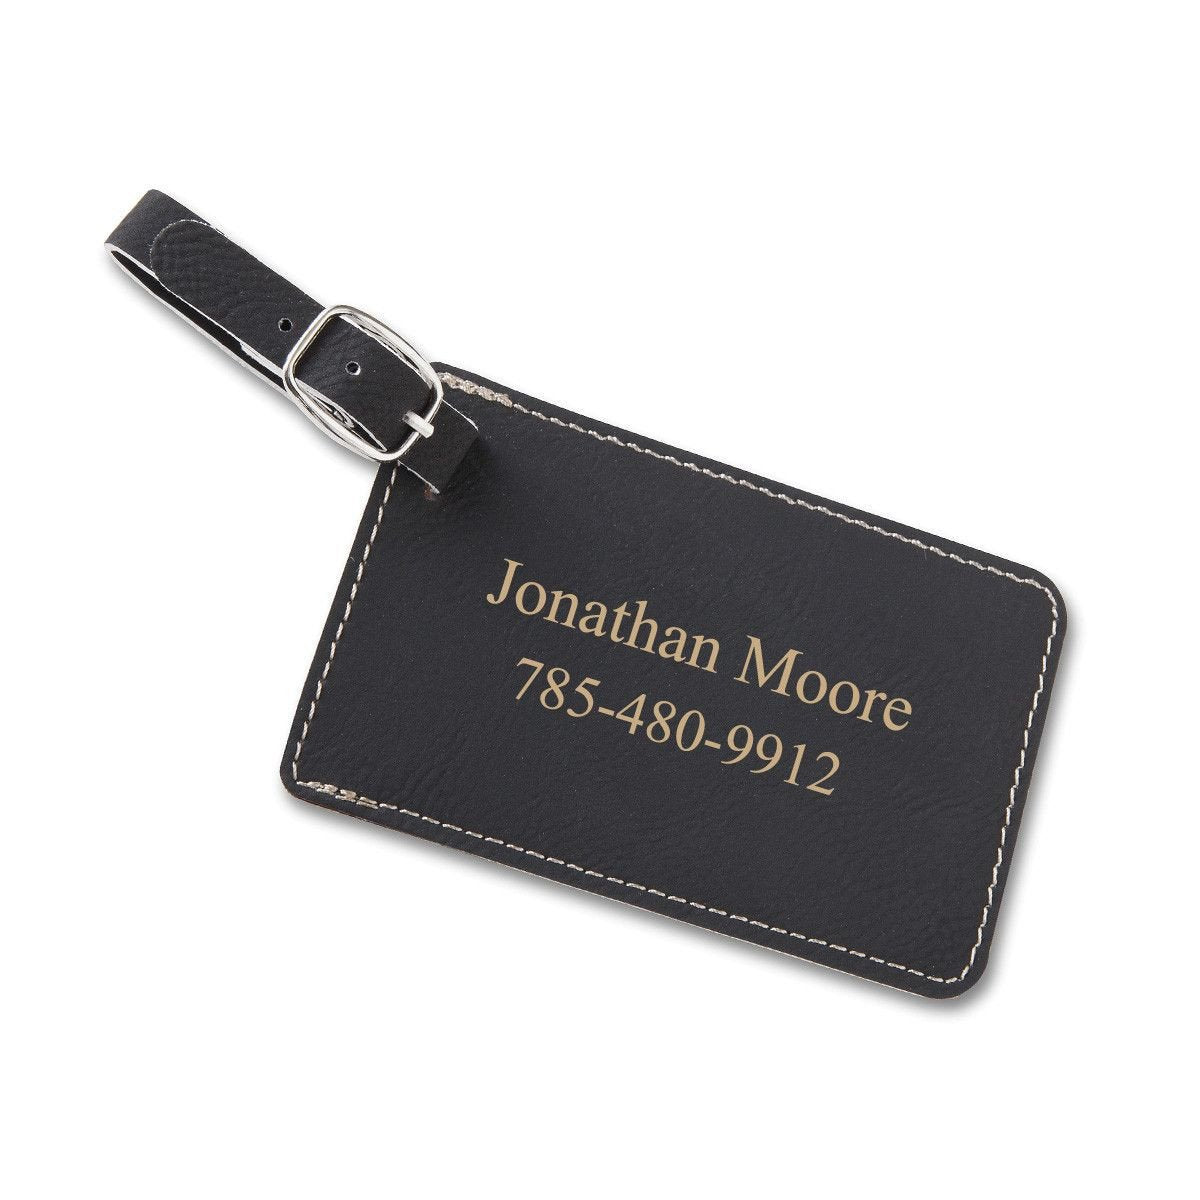 Personalized Leatherette Luggage Tags